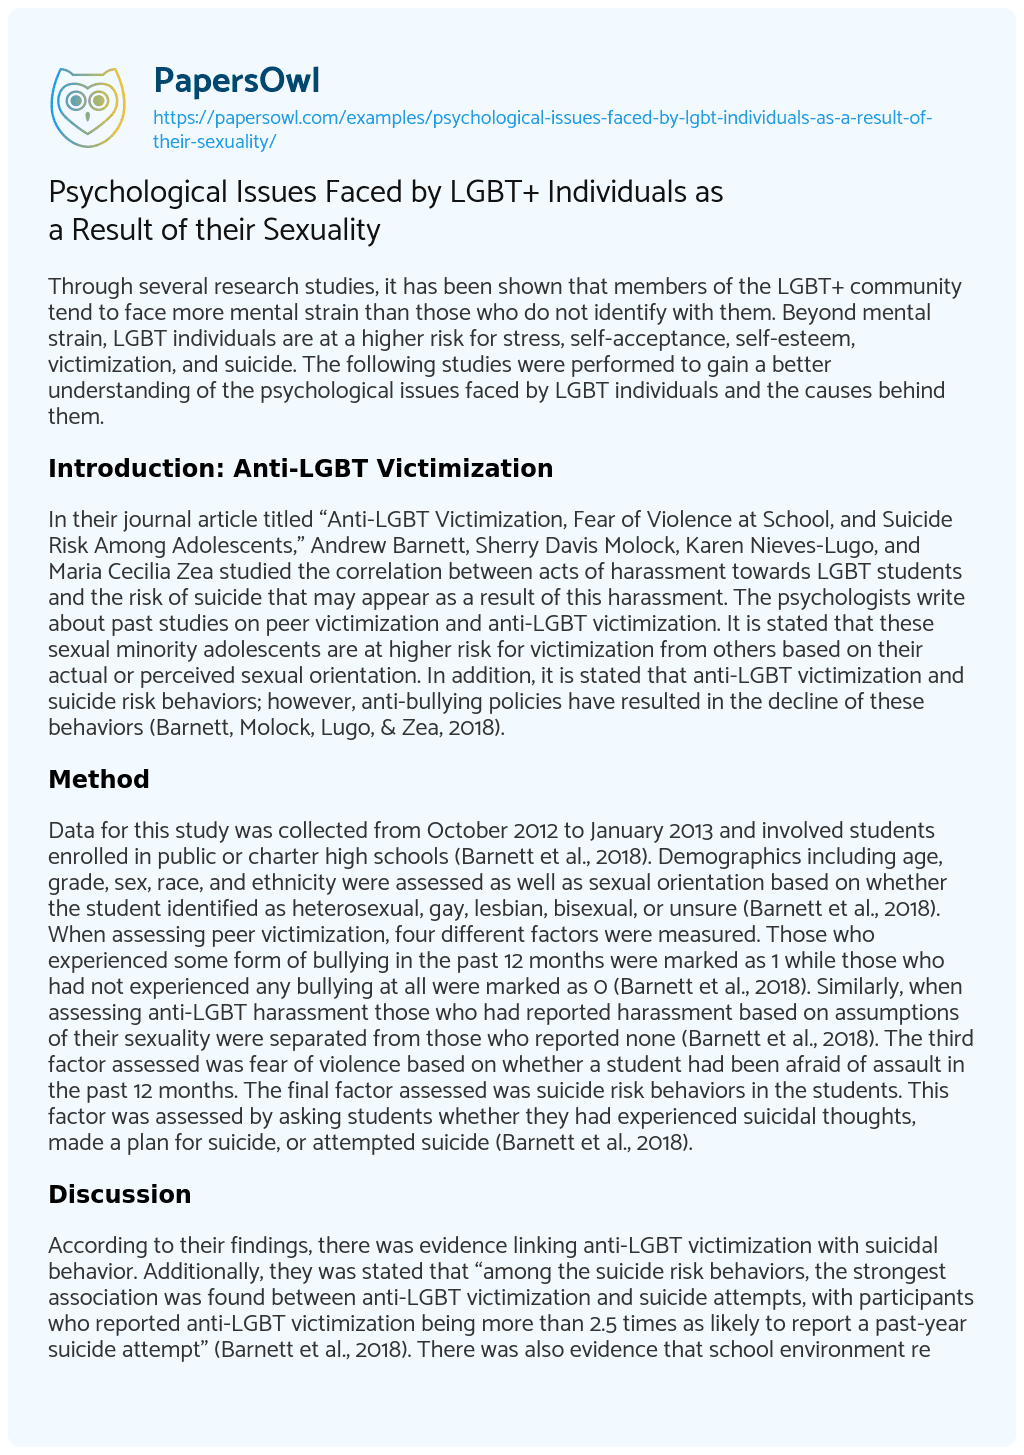 Psychological Issues Faced by LGBT+ Individuals as a Result of their Sexuality essay